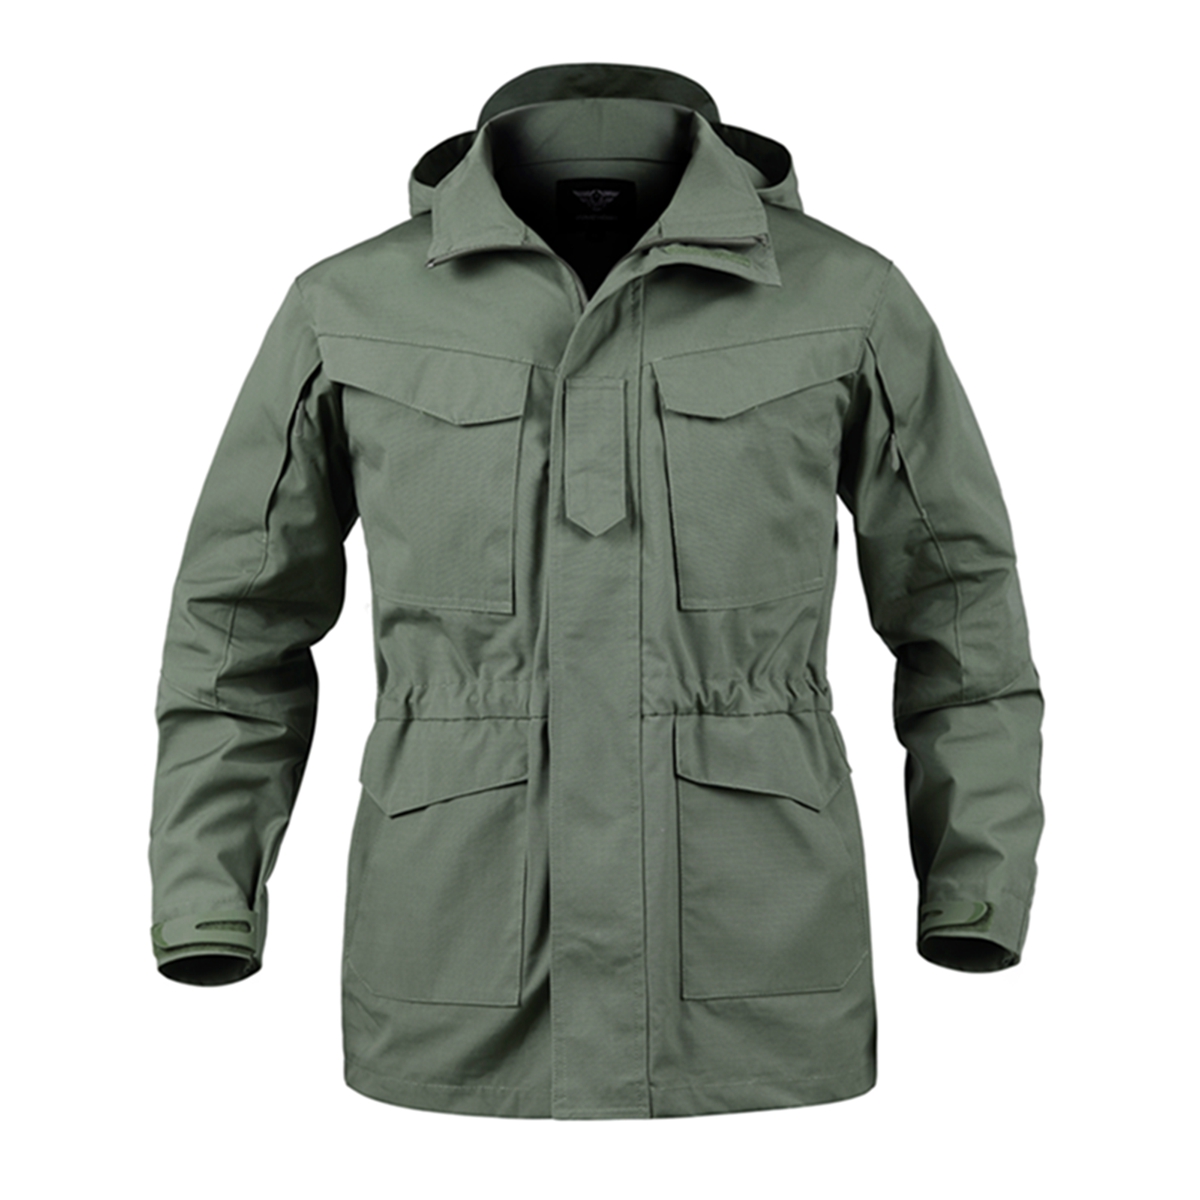 Tactical Winter Parka with High Quality Waterproof and Breathable